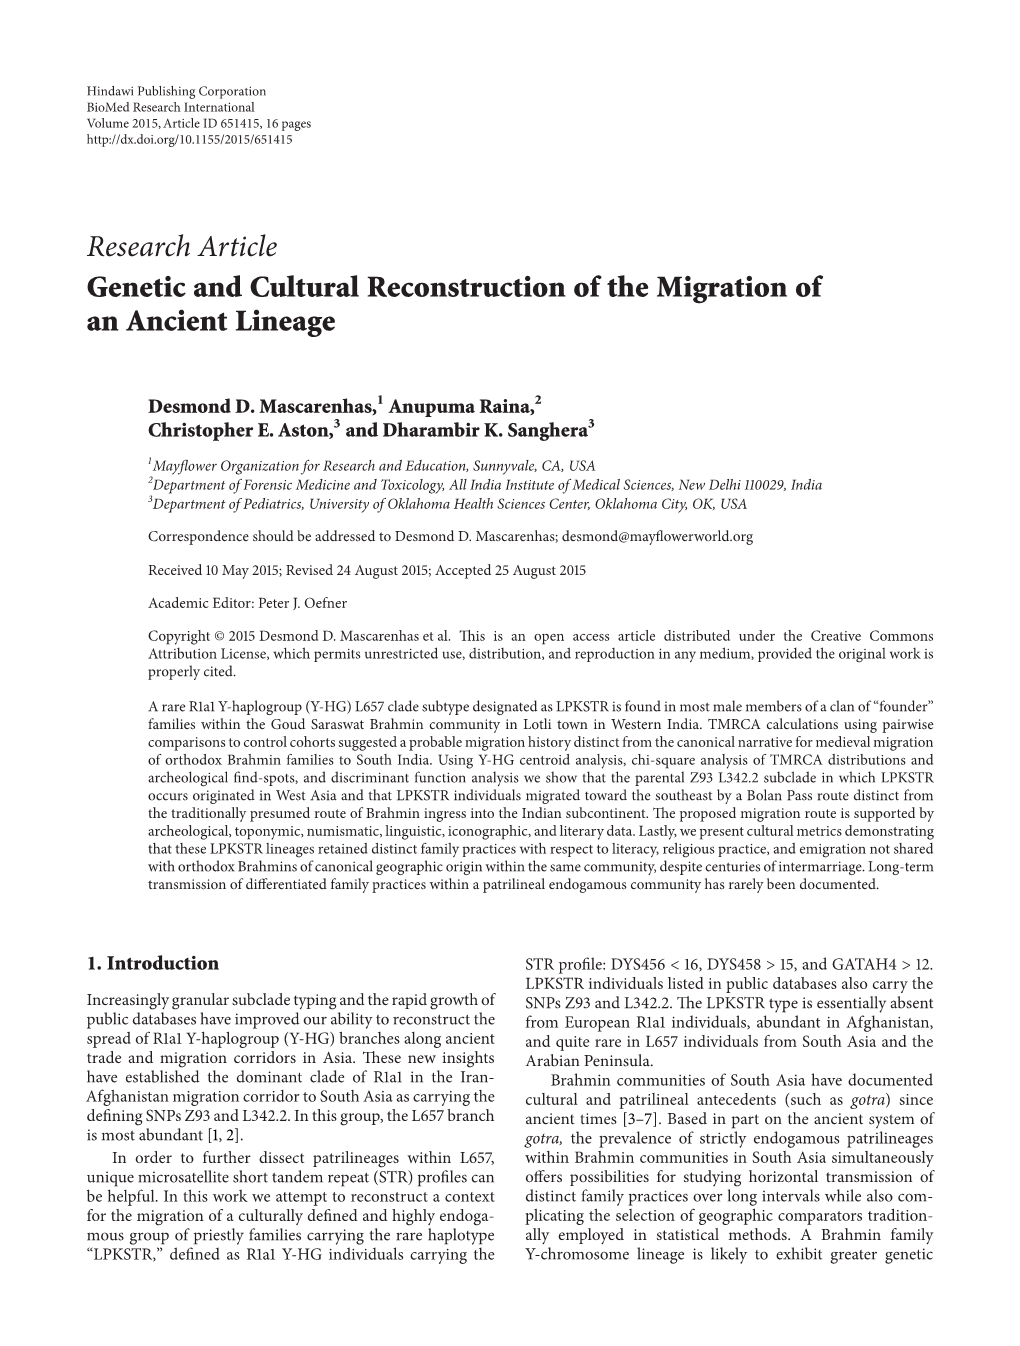 Research Article Genetic and Cultural Reconstruction of the Migration of an Ancient Lineage